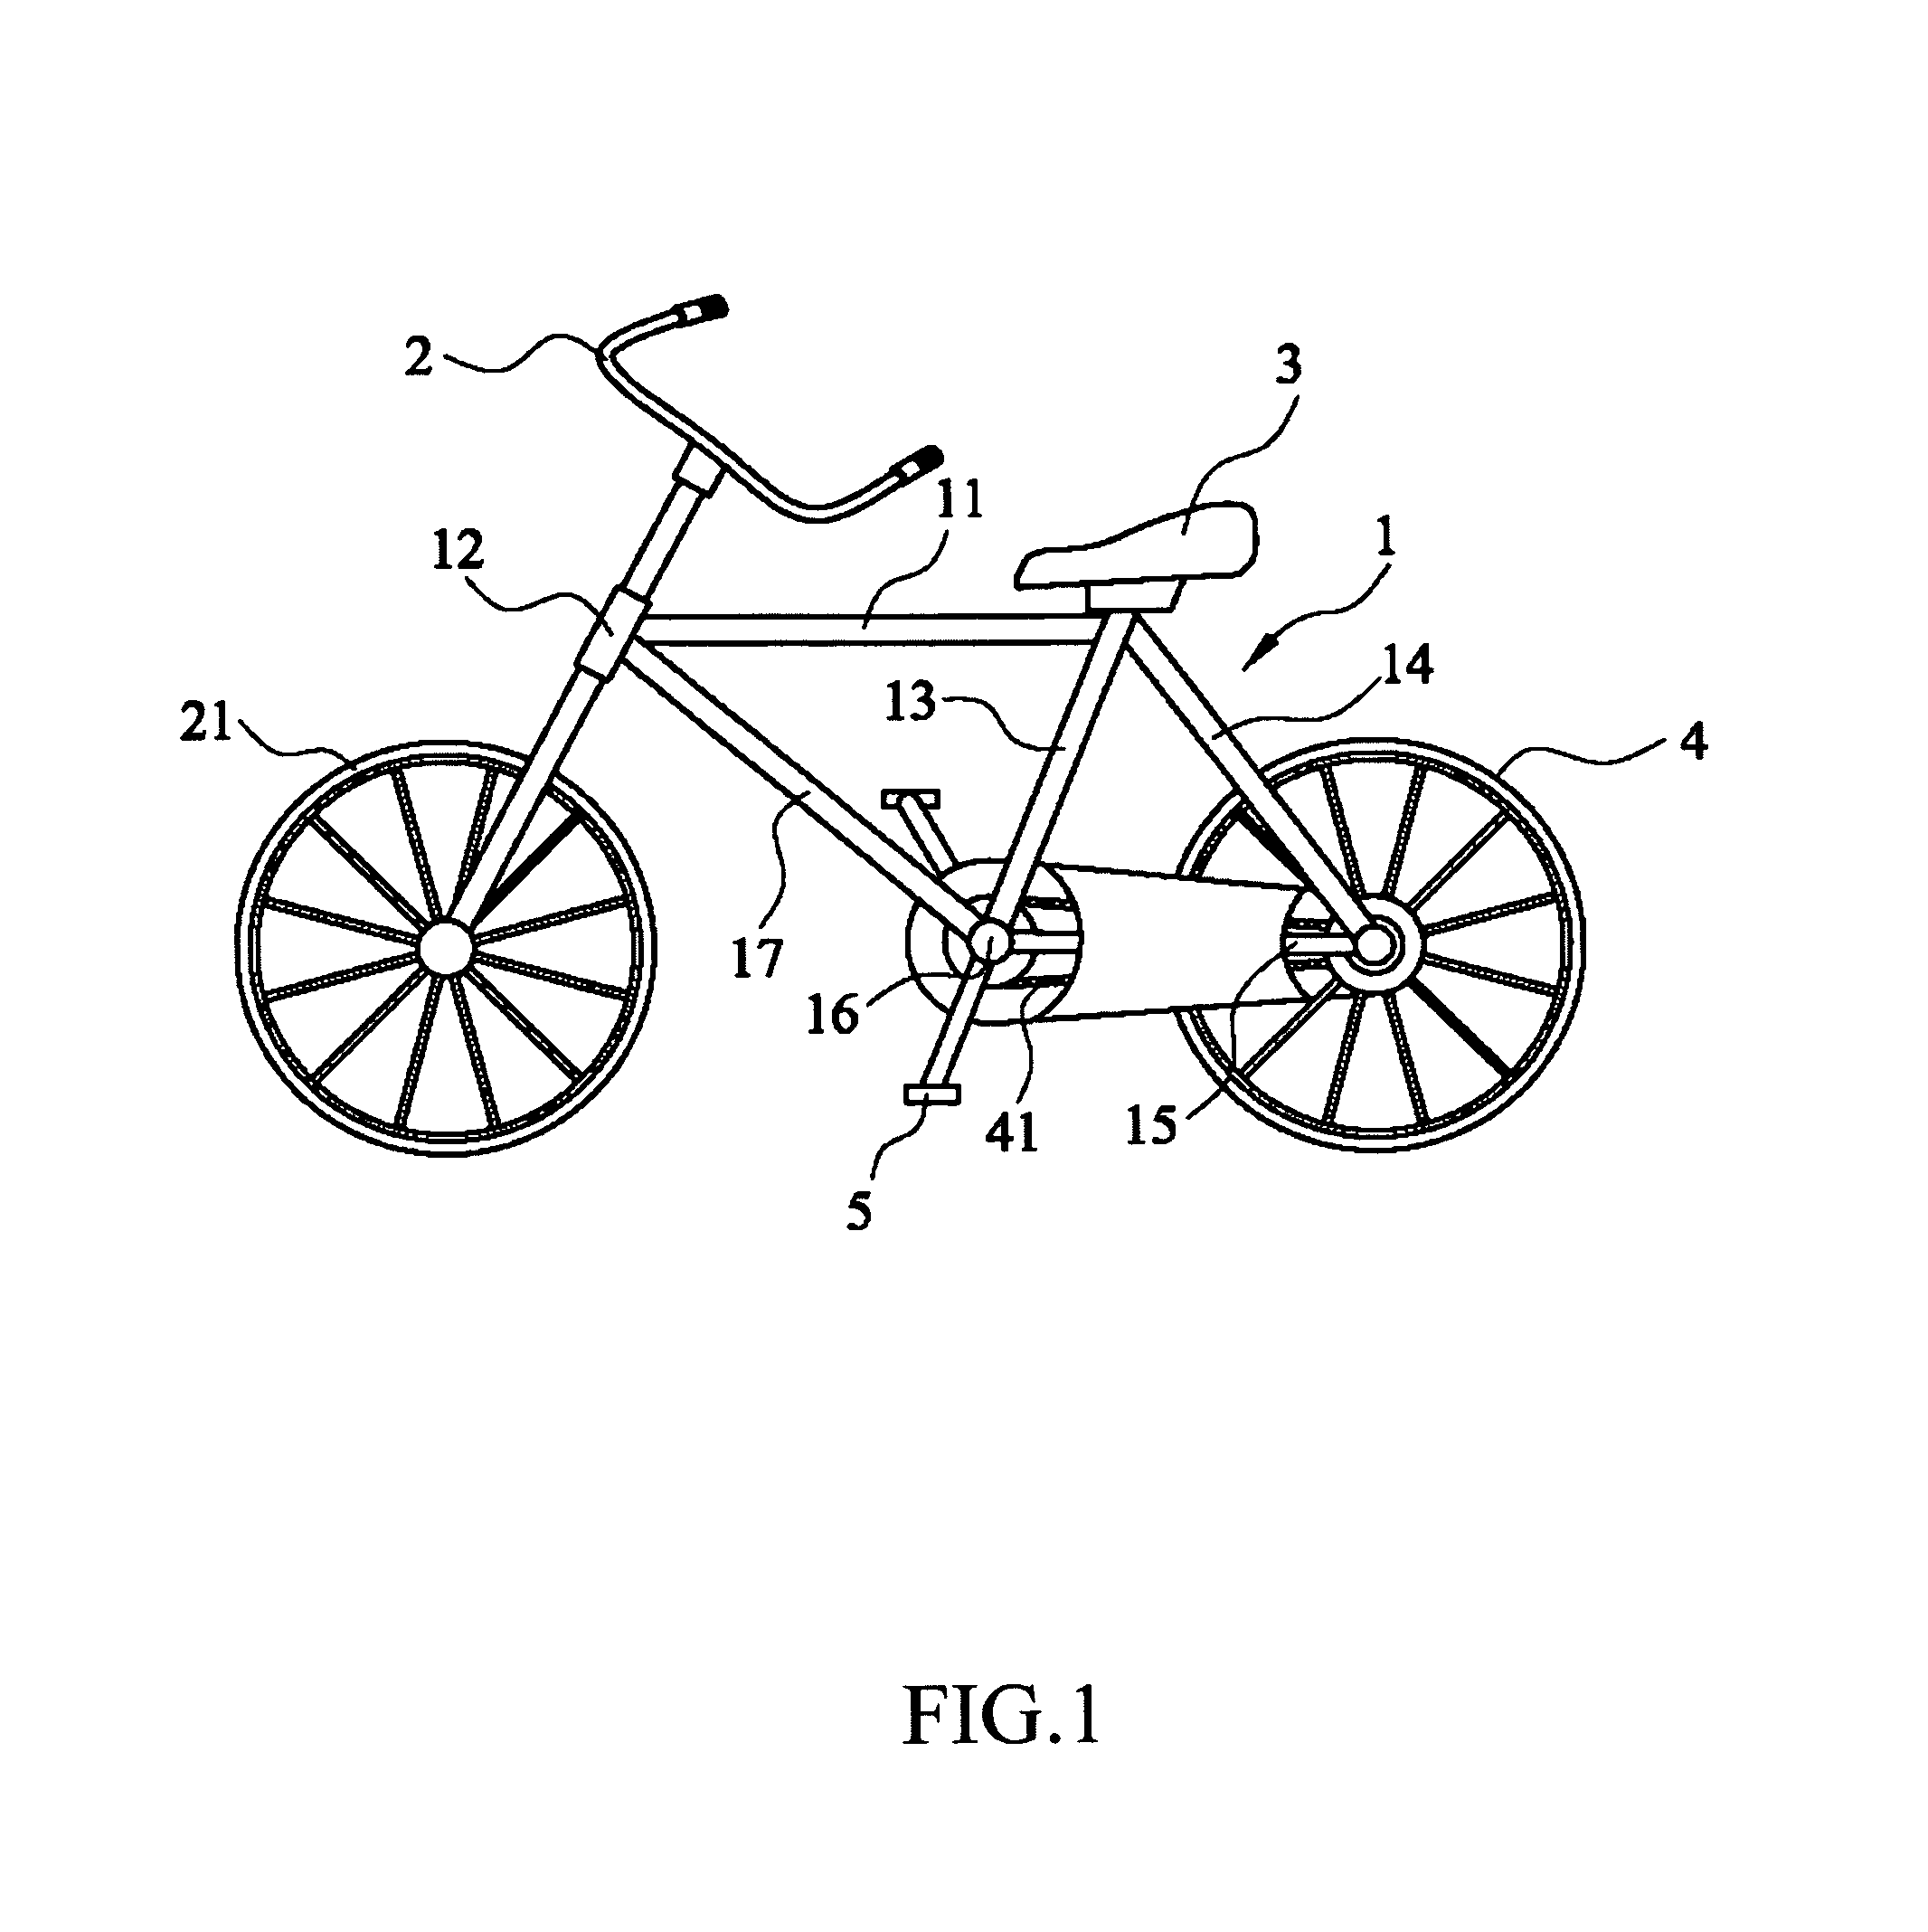 Vibration suppressed bicycle structure